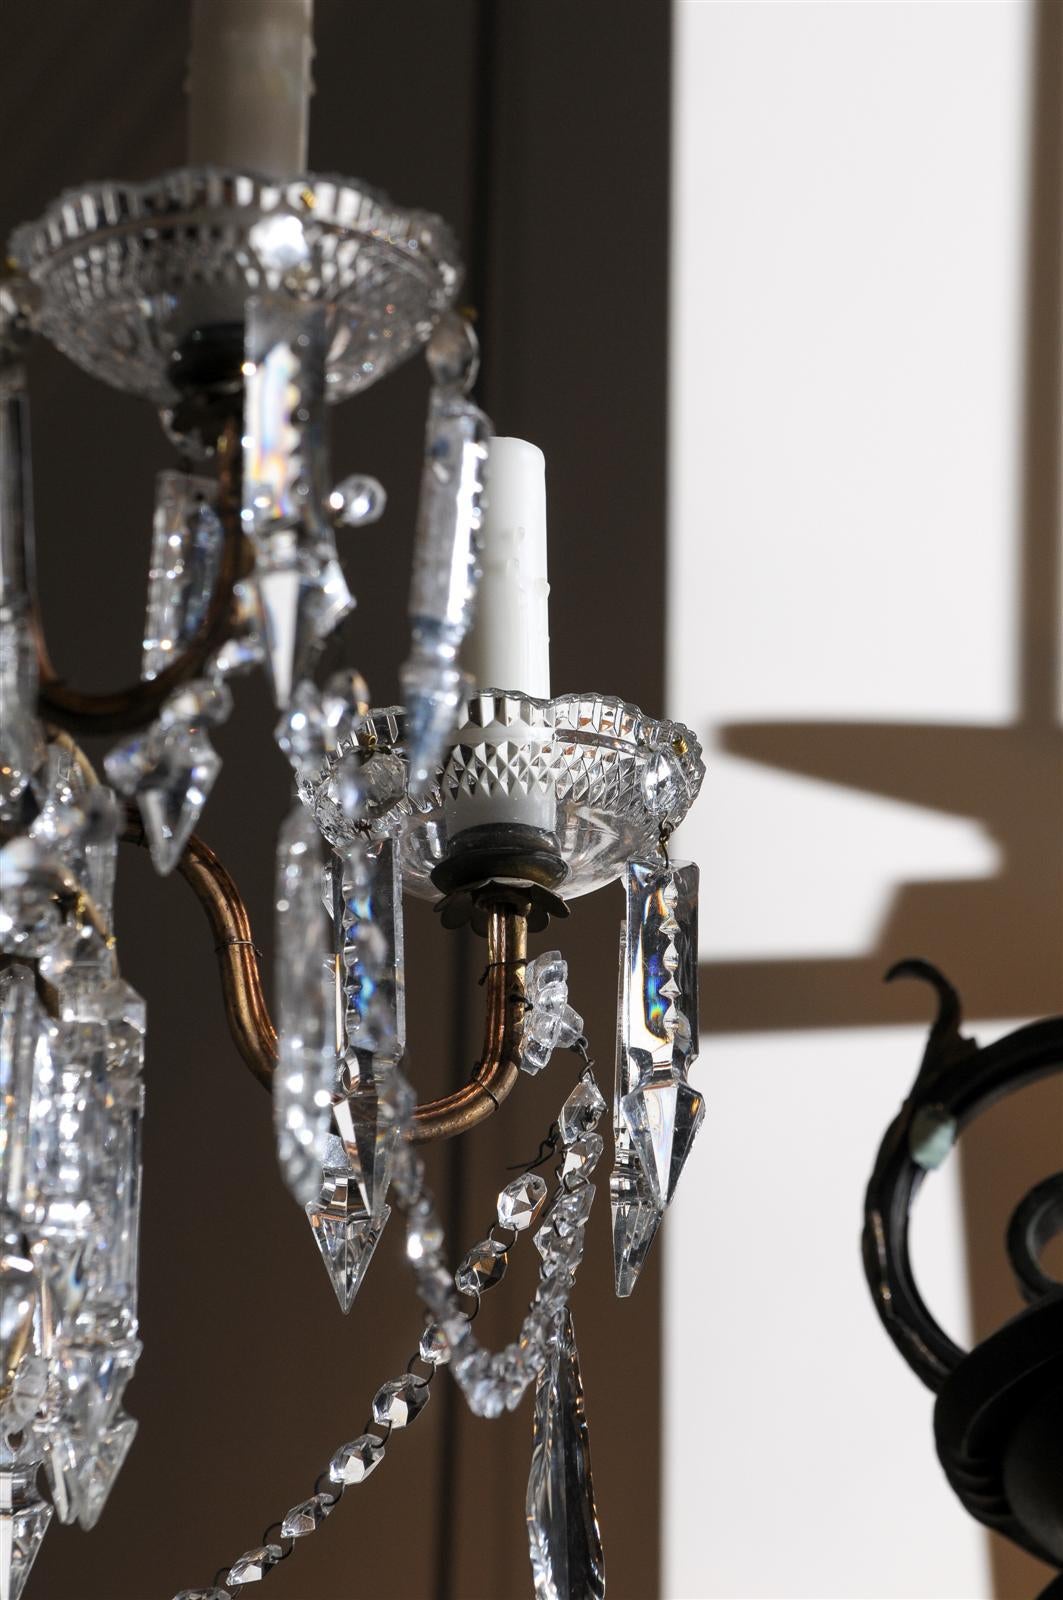 Italian Six-Light Crystal Basket Chandelier from the Early 20th Century For Sale 5